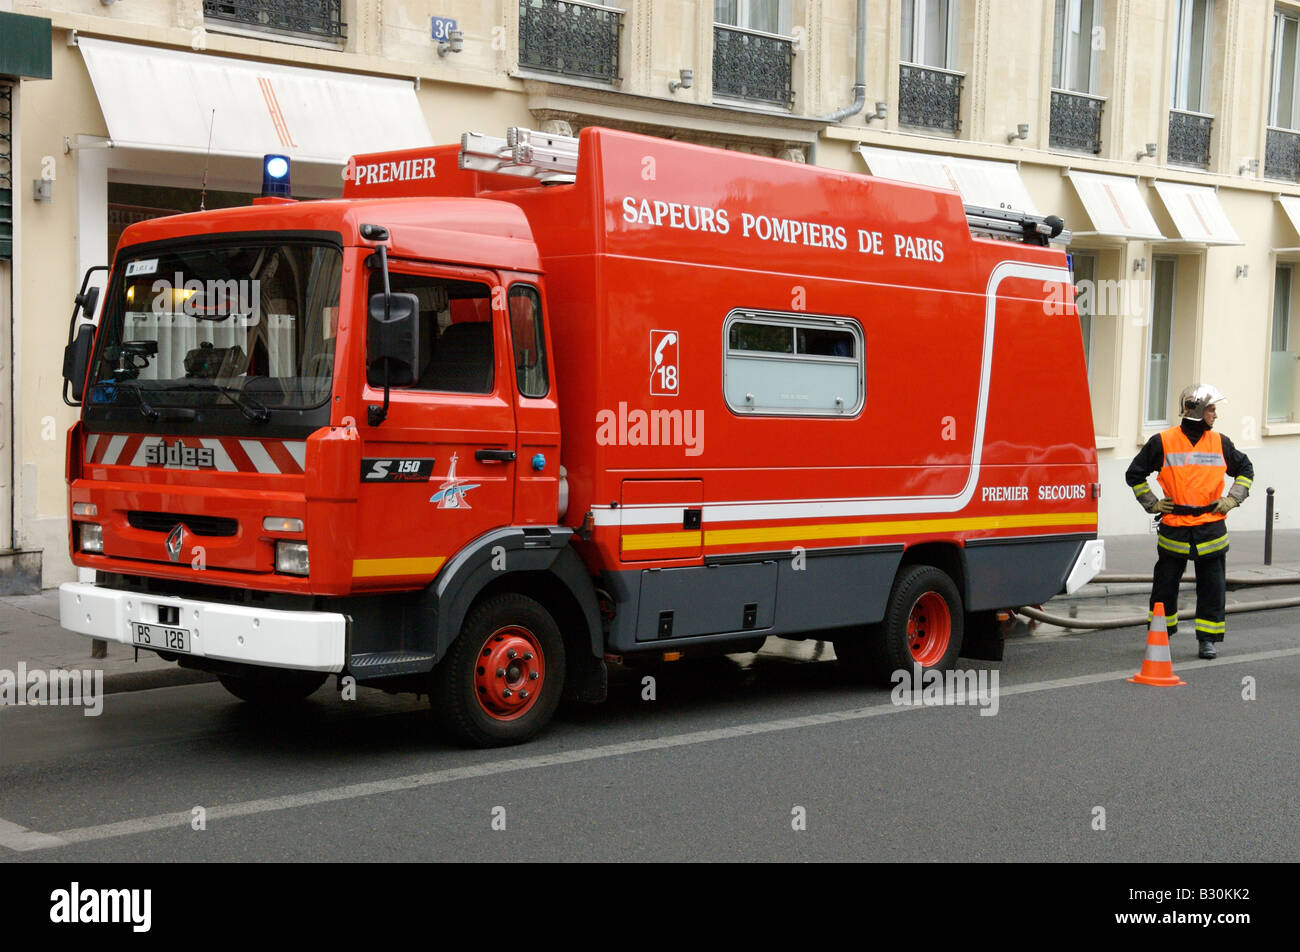 A fire engine in central Paris, France Stock Photo